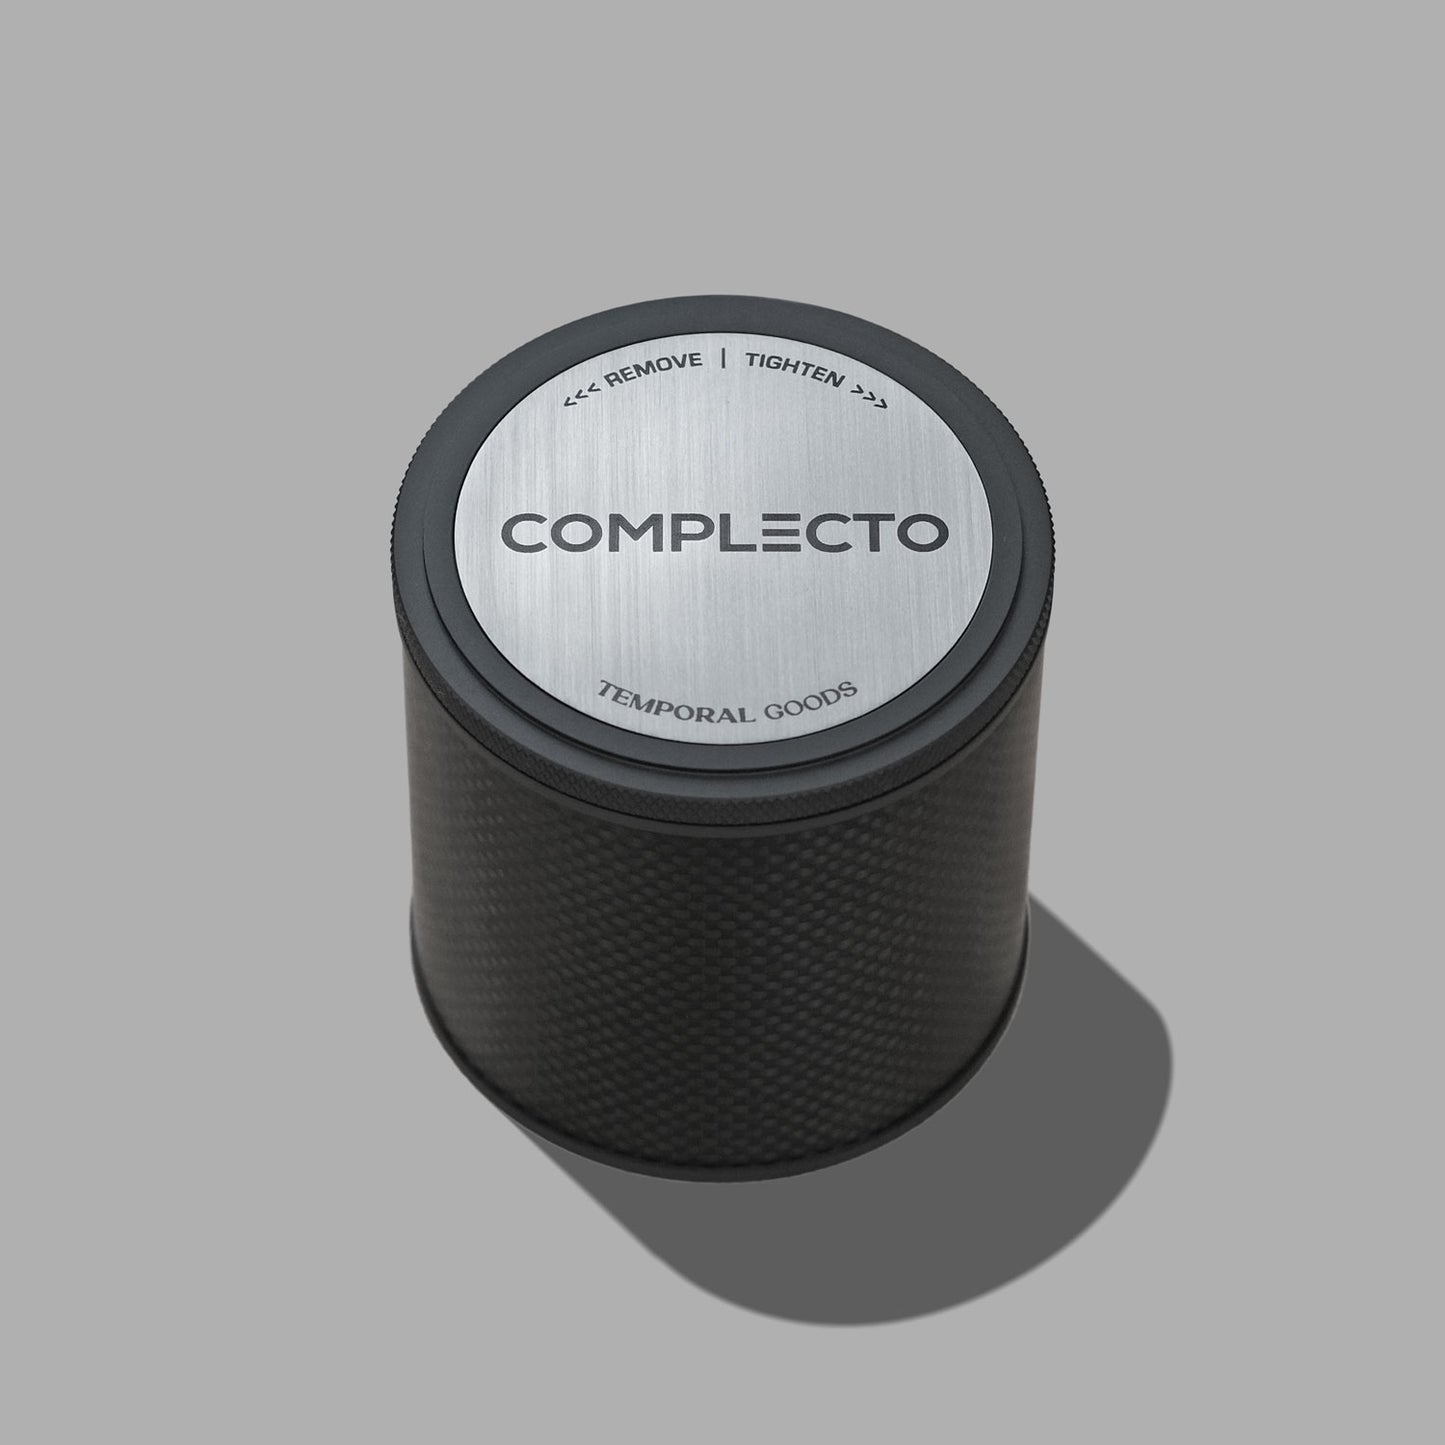 Complecto Watch Case